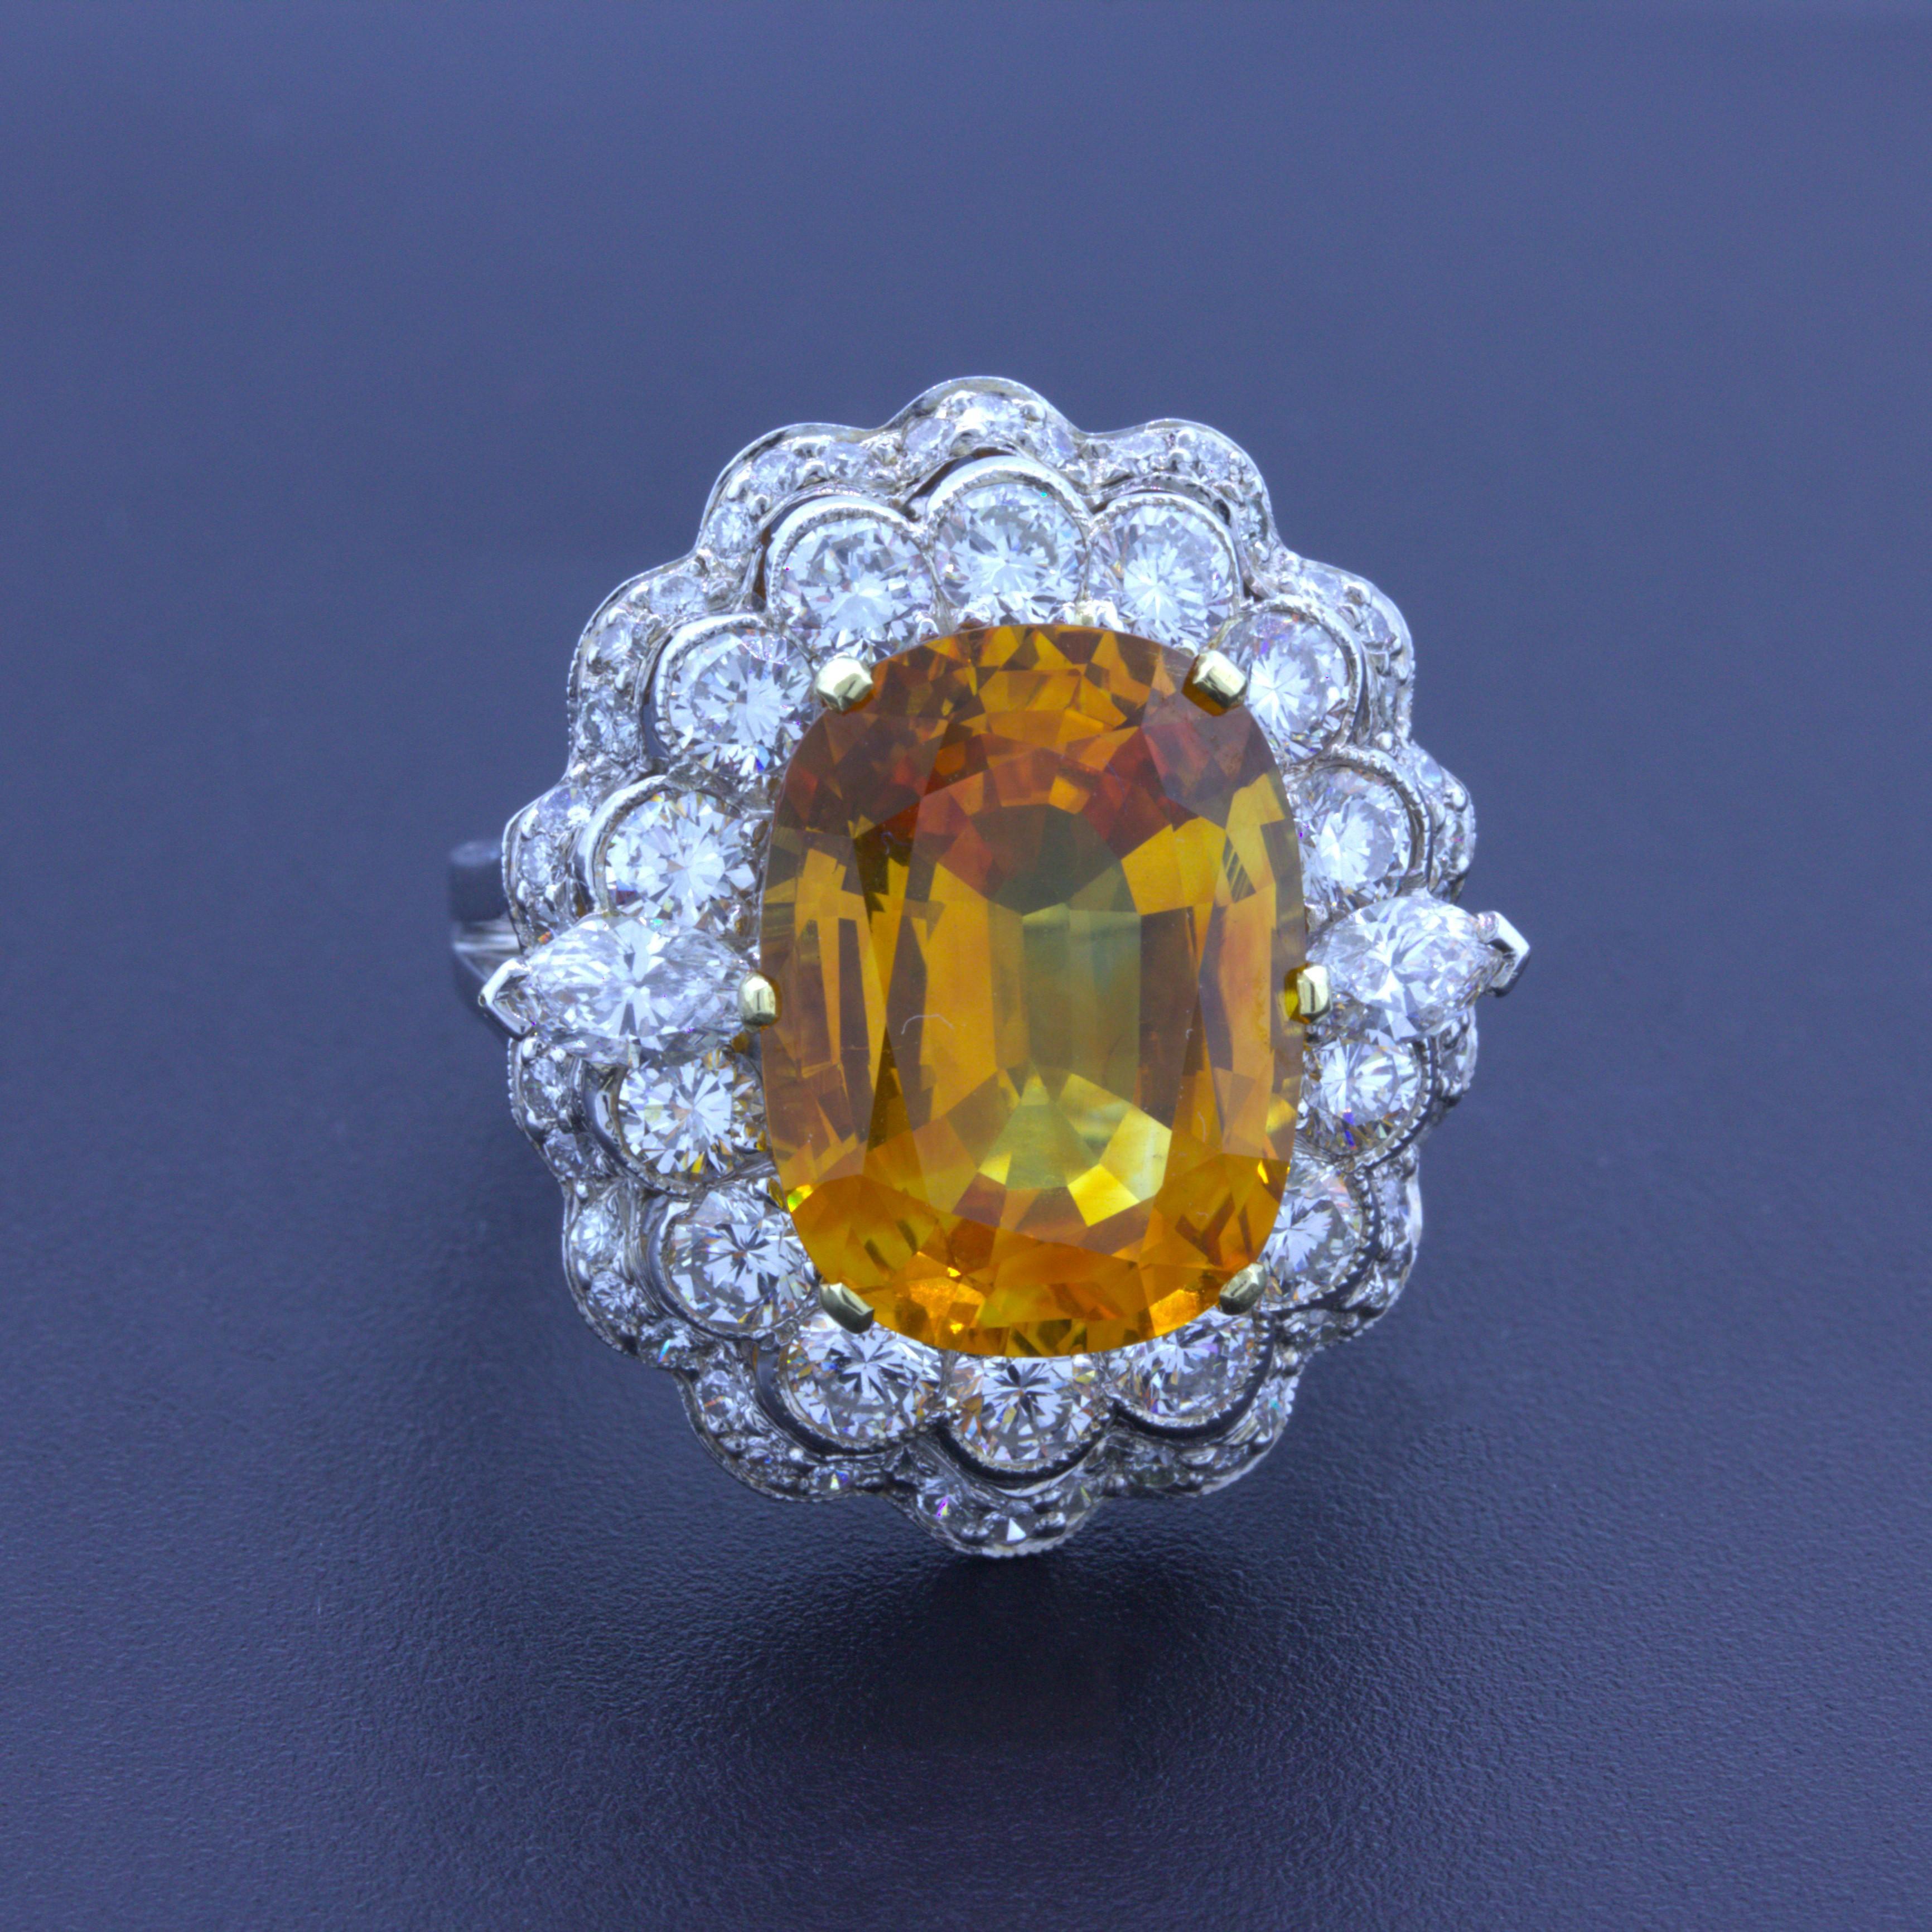 A large and impressive natural orange sapphire weighing 10.50 carats. It has a rich and brilliant orange color with excellent brightness. Additionally, it is extremely clean with no visible inclusions and certified by the GIA. It is complemented by